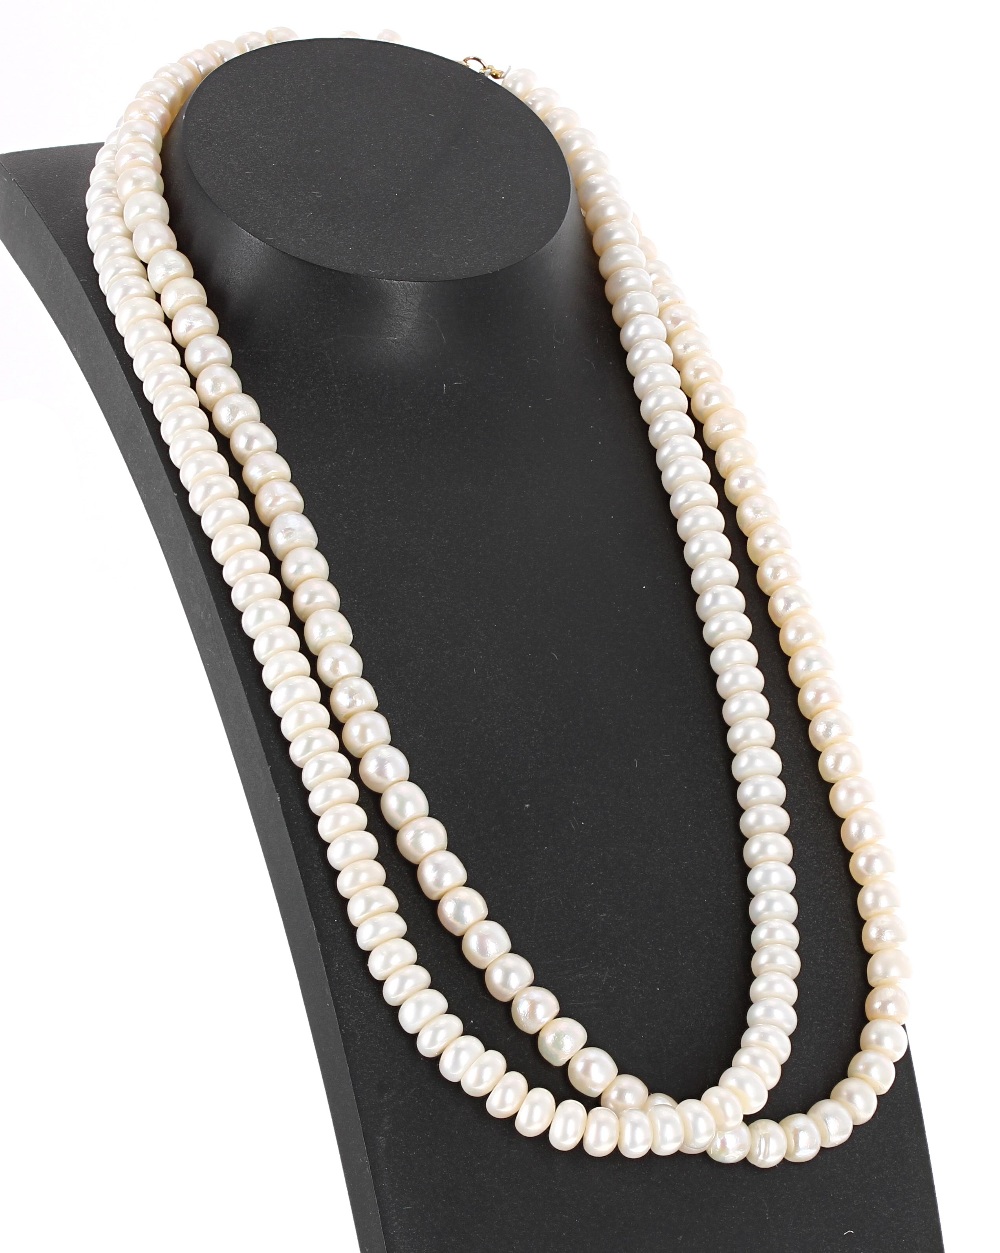 Two strings of graduated cultured pearls necklaces, the pearls graduating from 6mmm to 7mm, each 16"